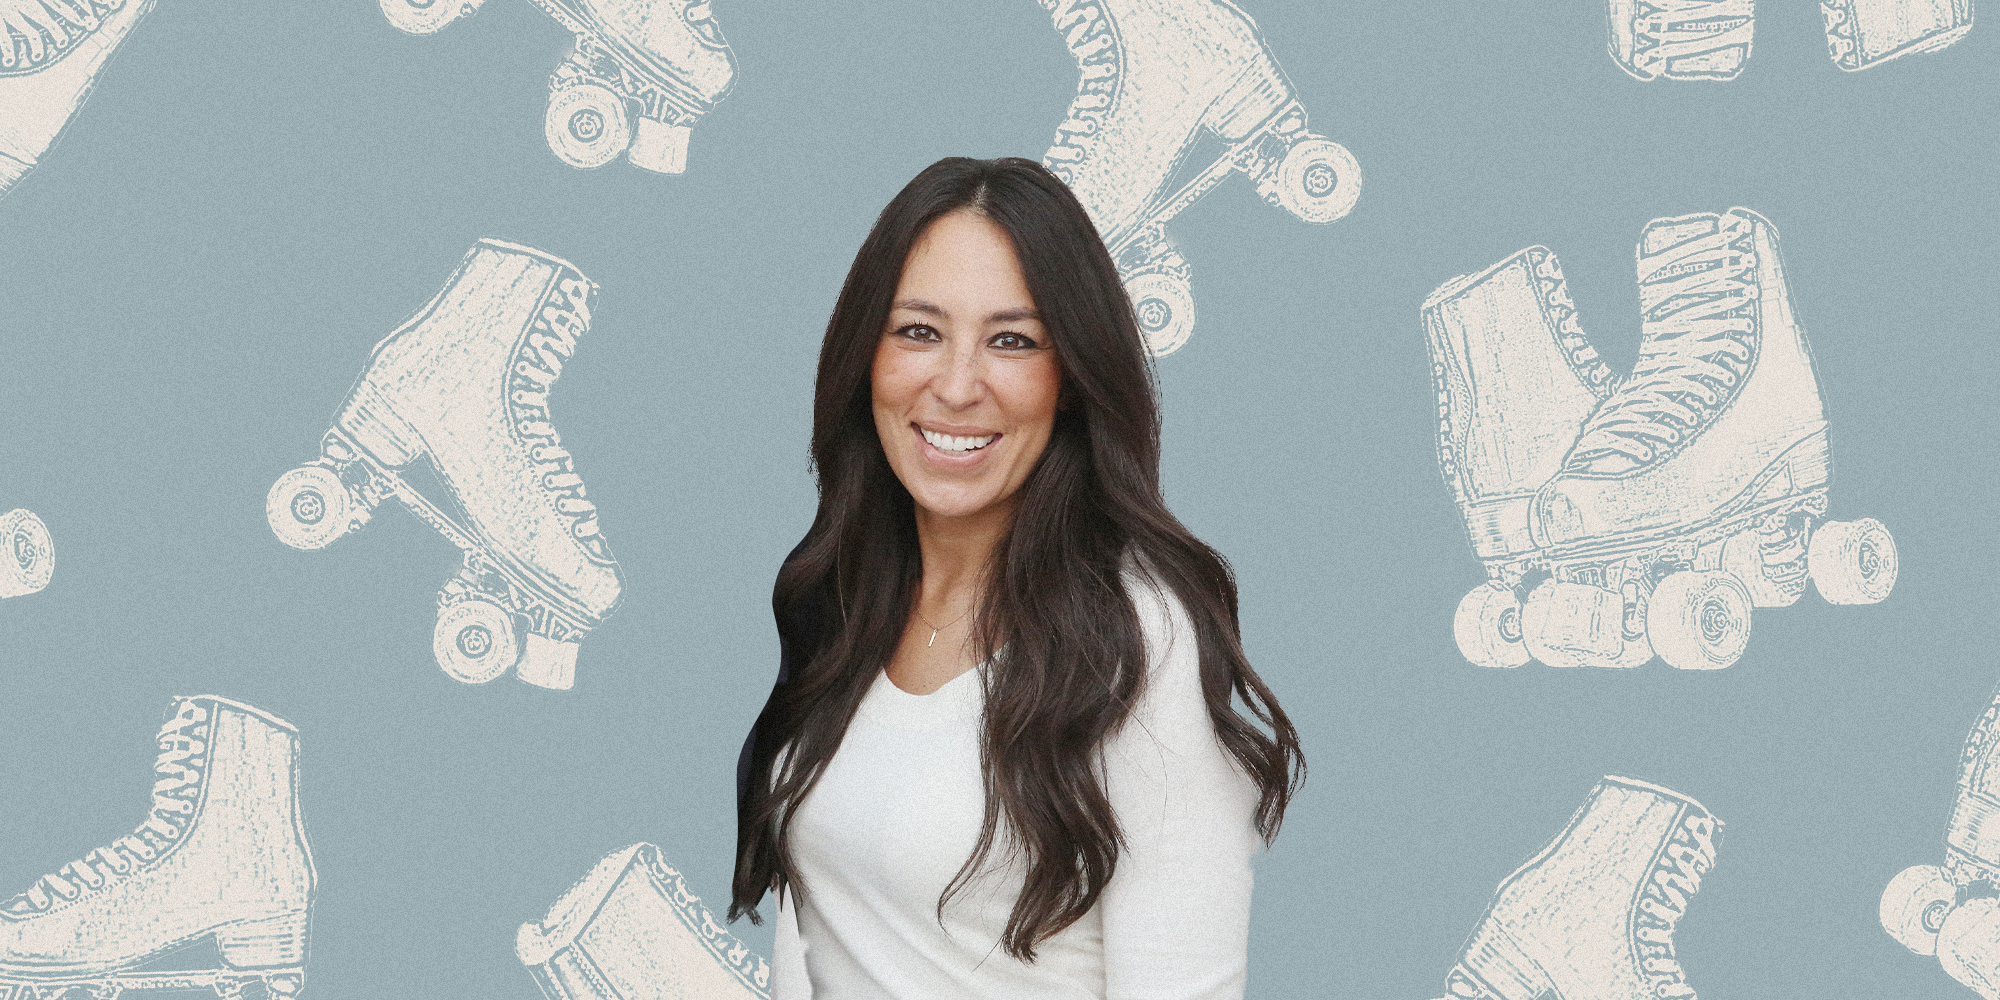 We're Calling It: Joanna Gaines's Pastel Roller Skates Are About to Sell Out